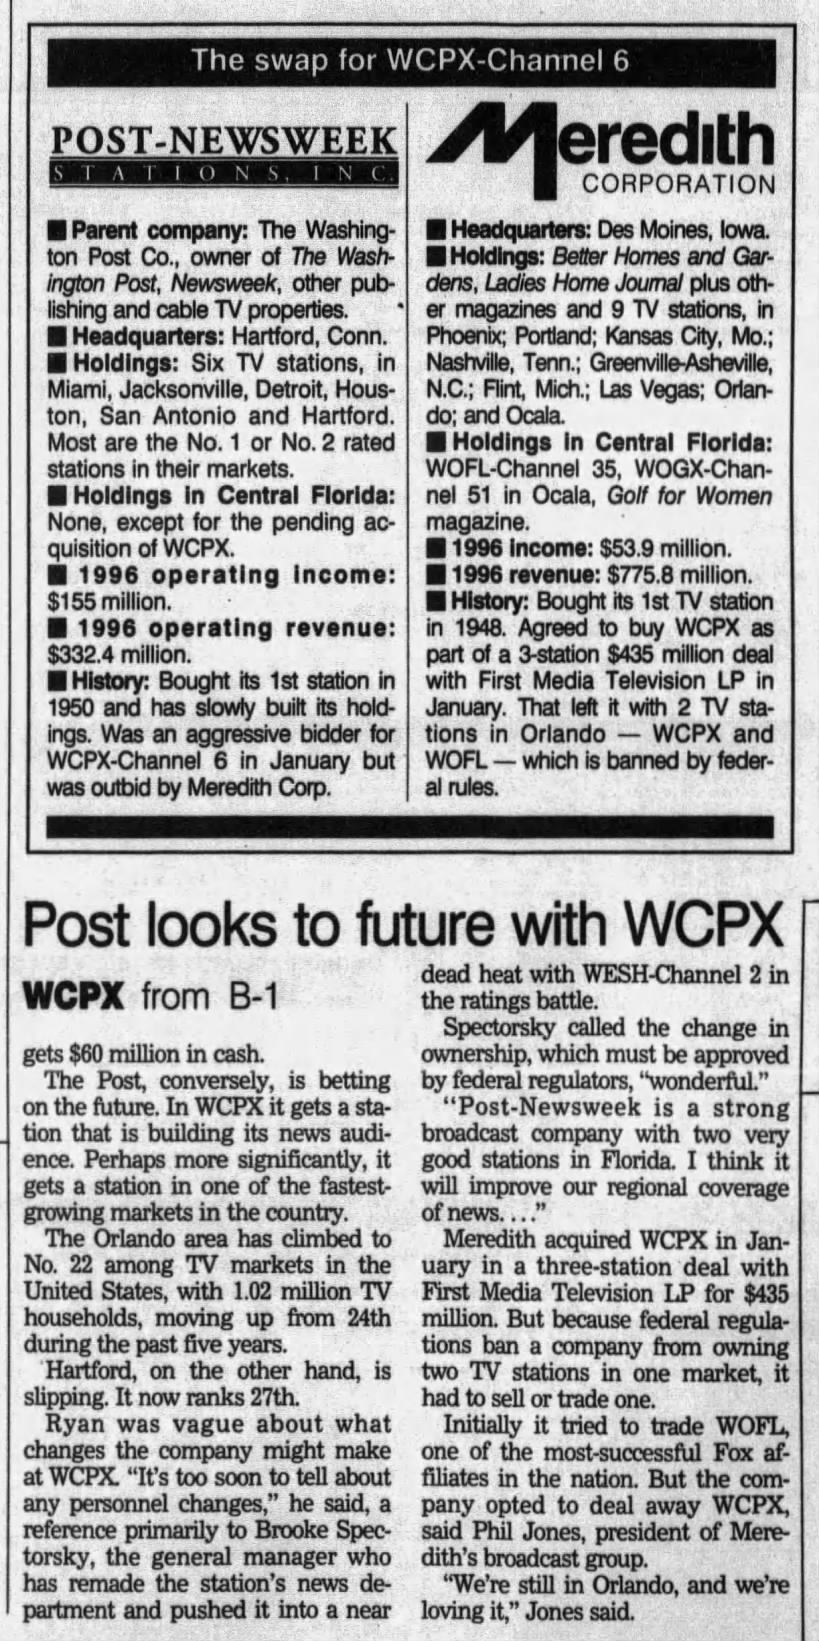 Post looks to future with WCPX